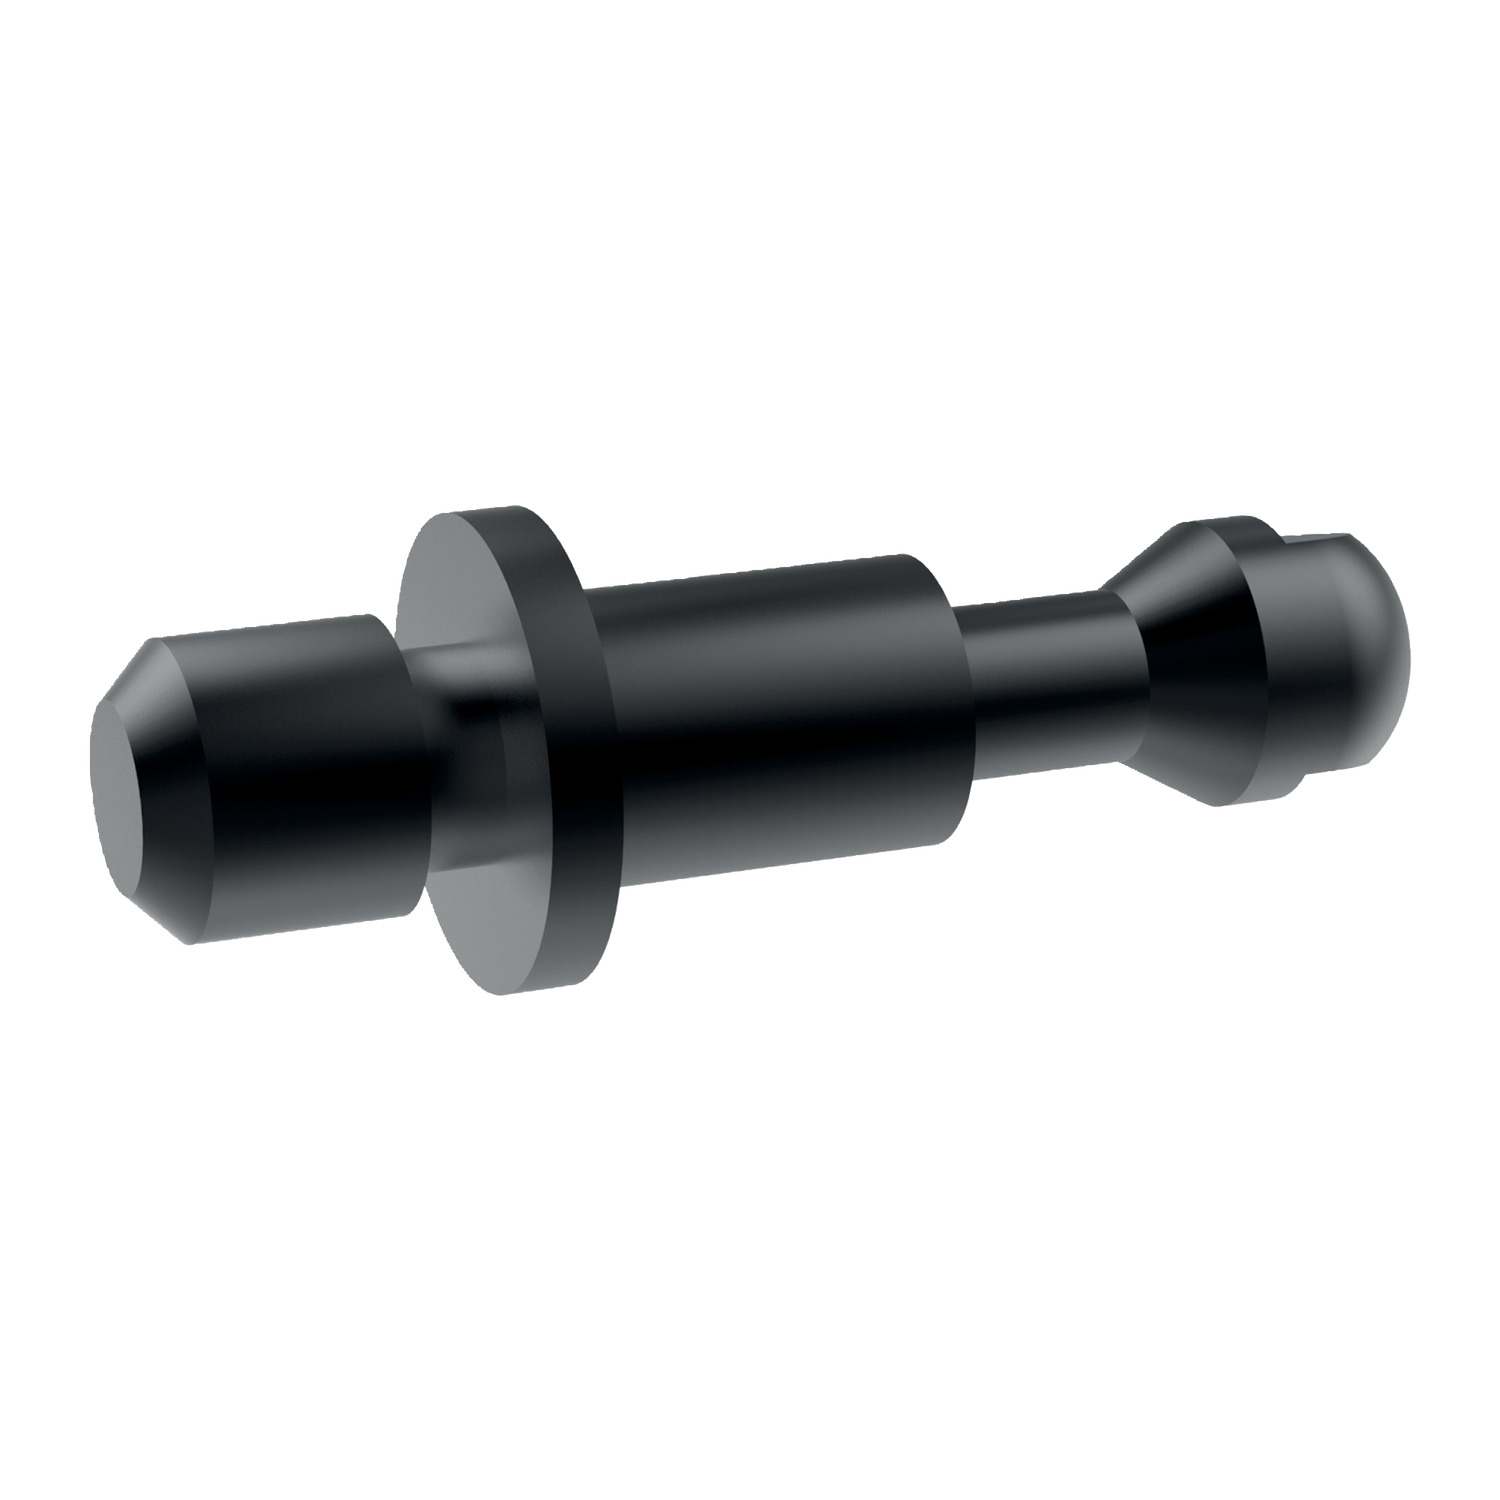 Product 12620.2, Clamping Screws for pull clamps / 